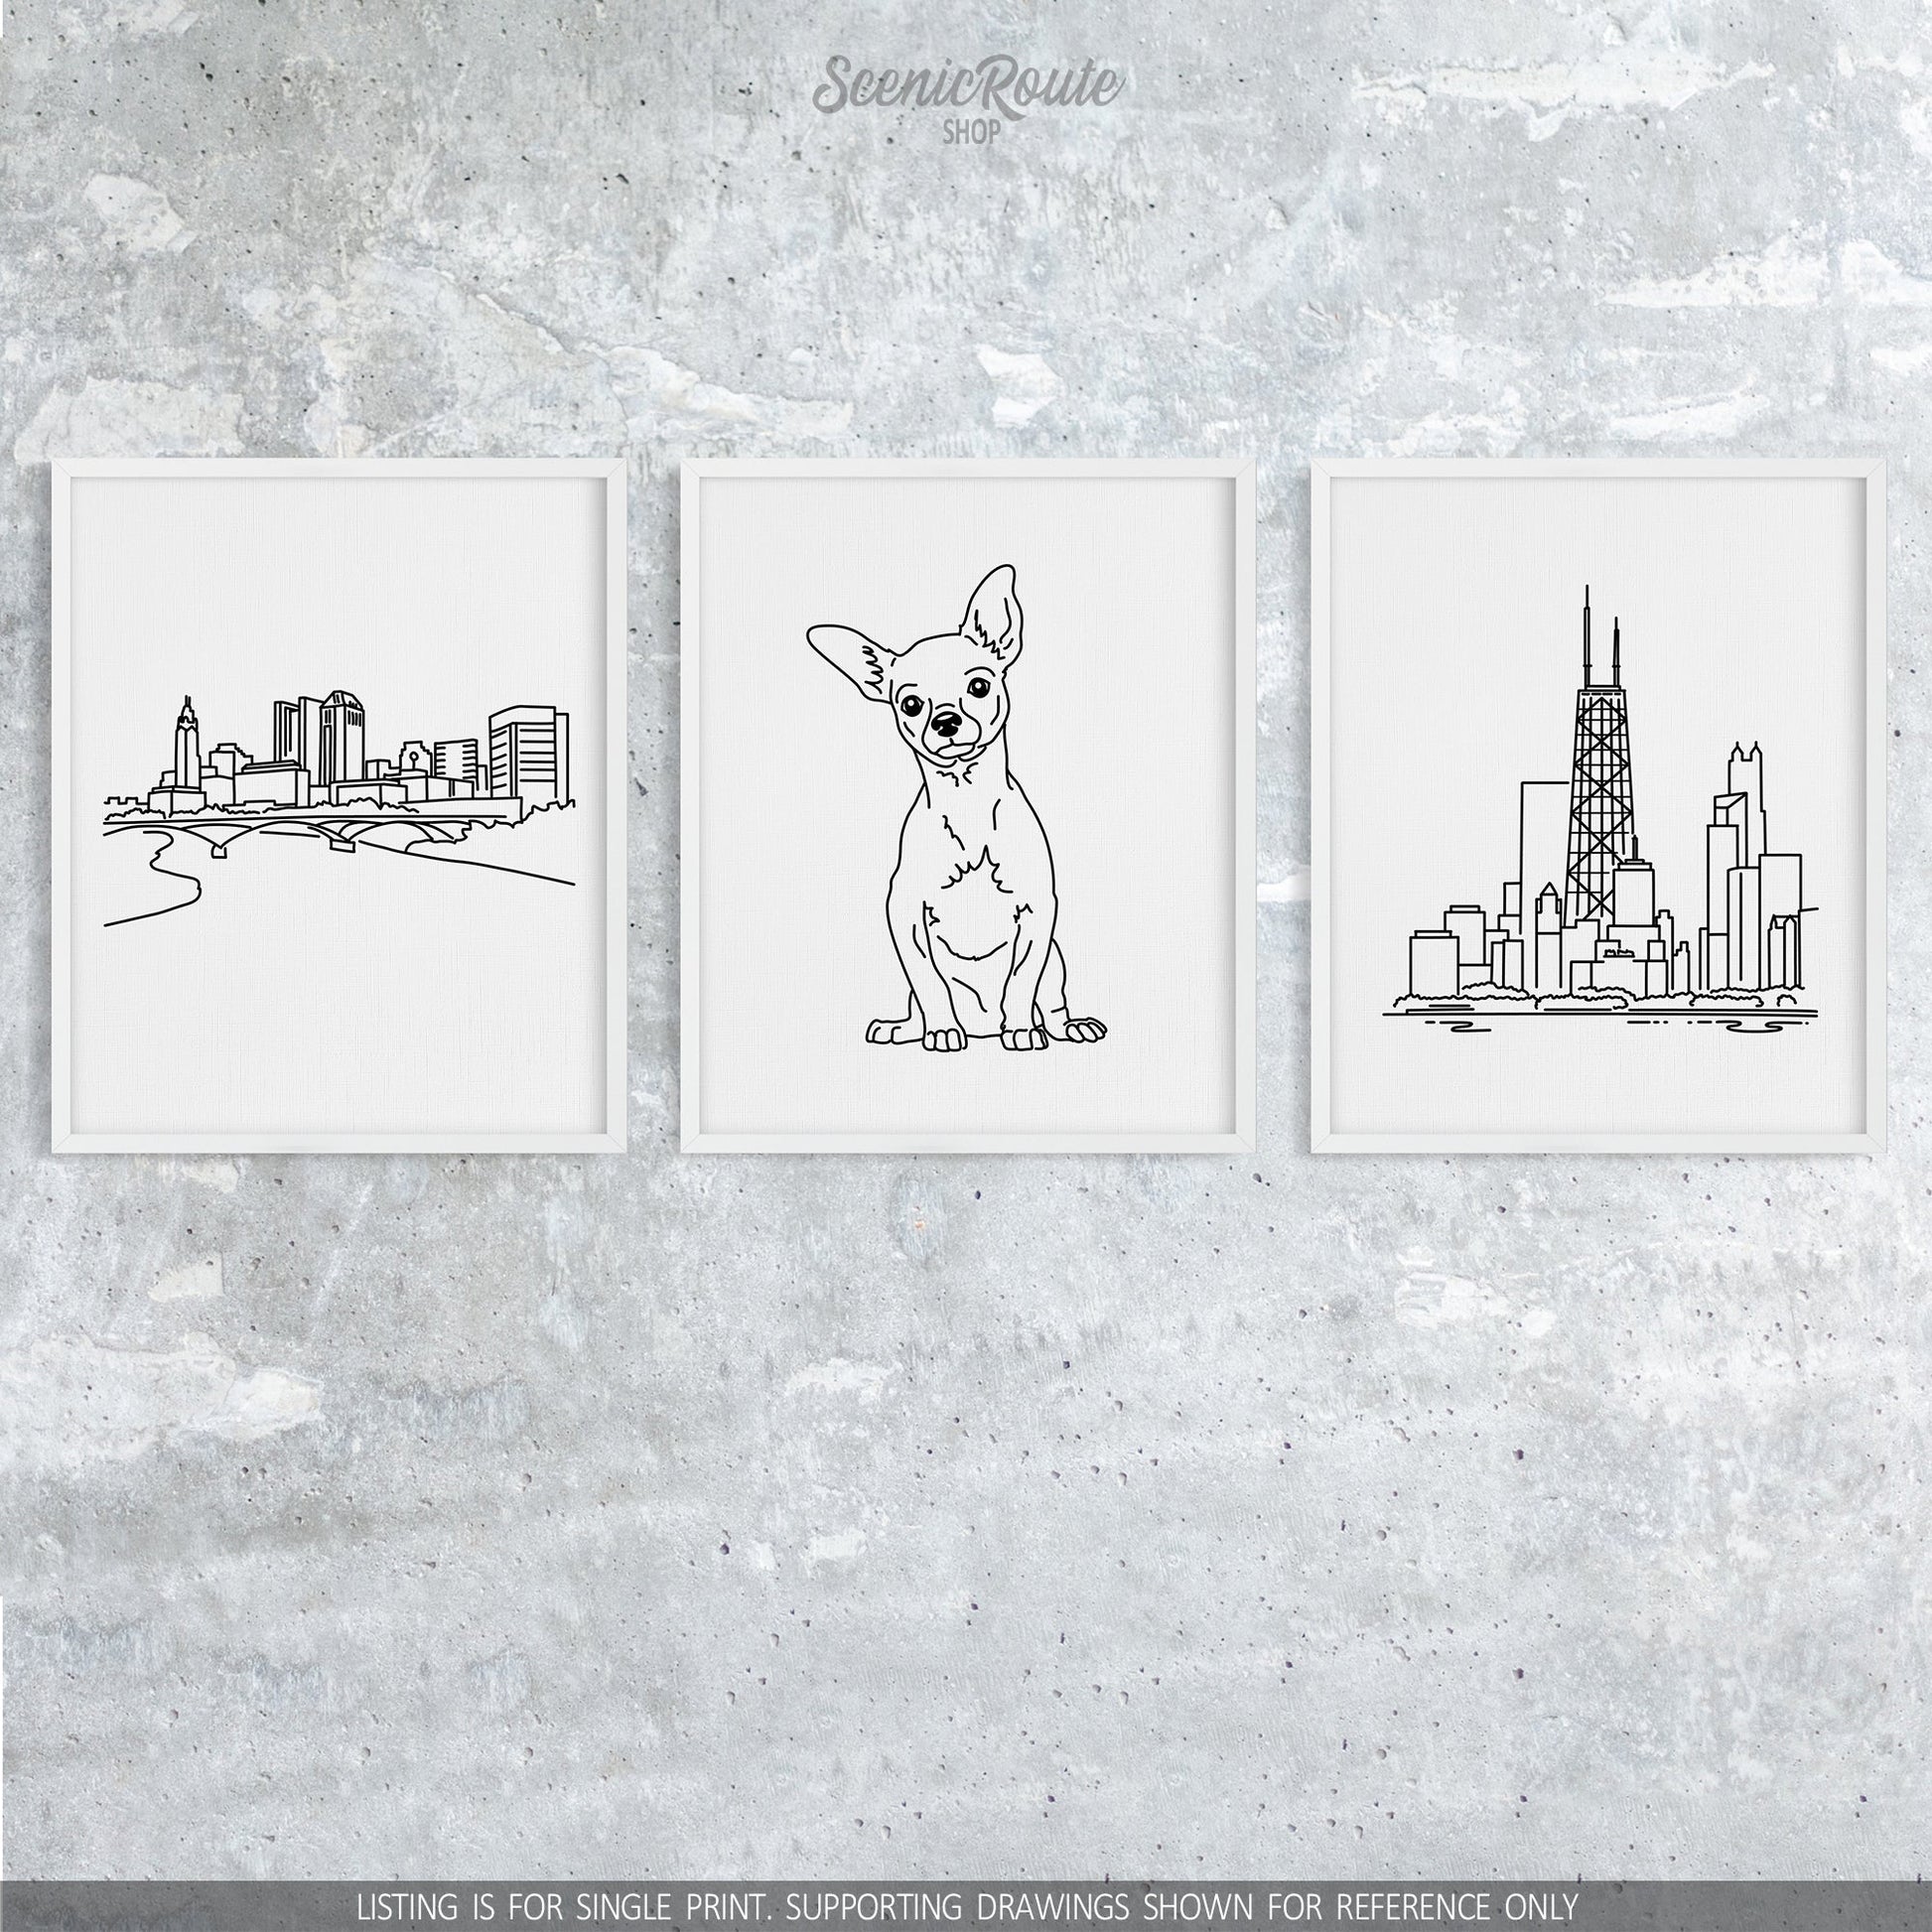 A group of three framed drawings on a concrete wall. The line art drawings include the Columbus Skyline, a Chihuahua dog, and the John Hancock Tower in Chicago